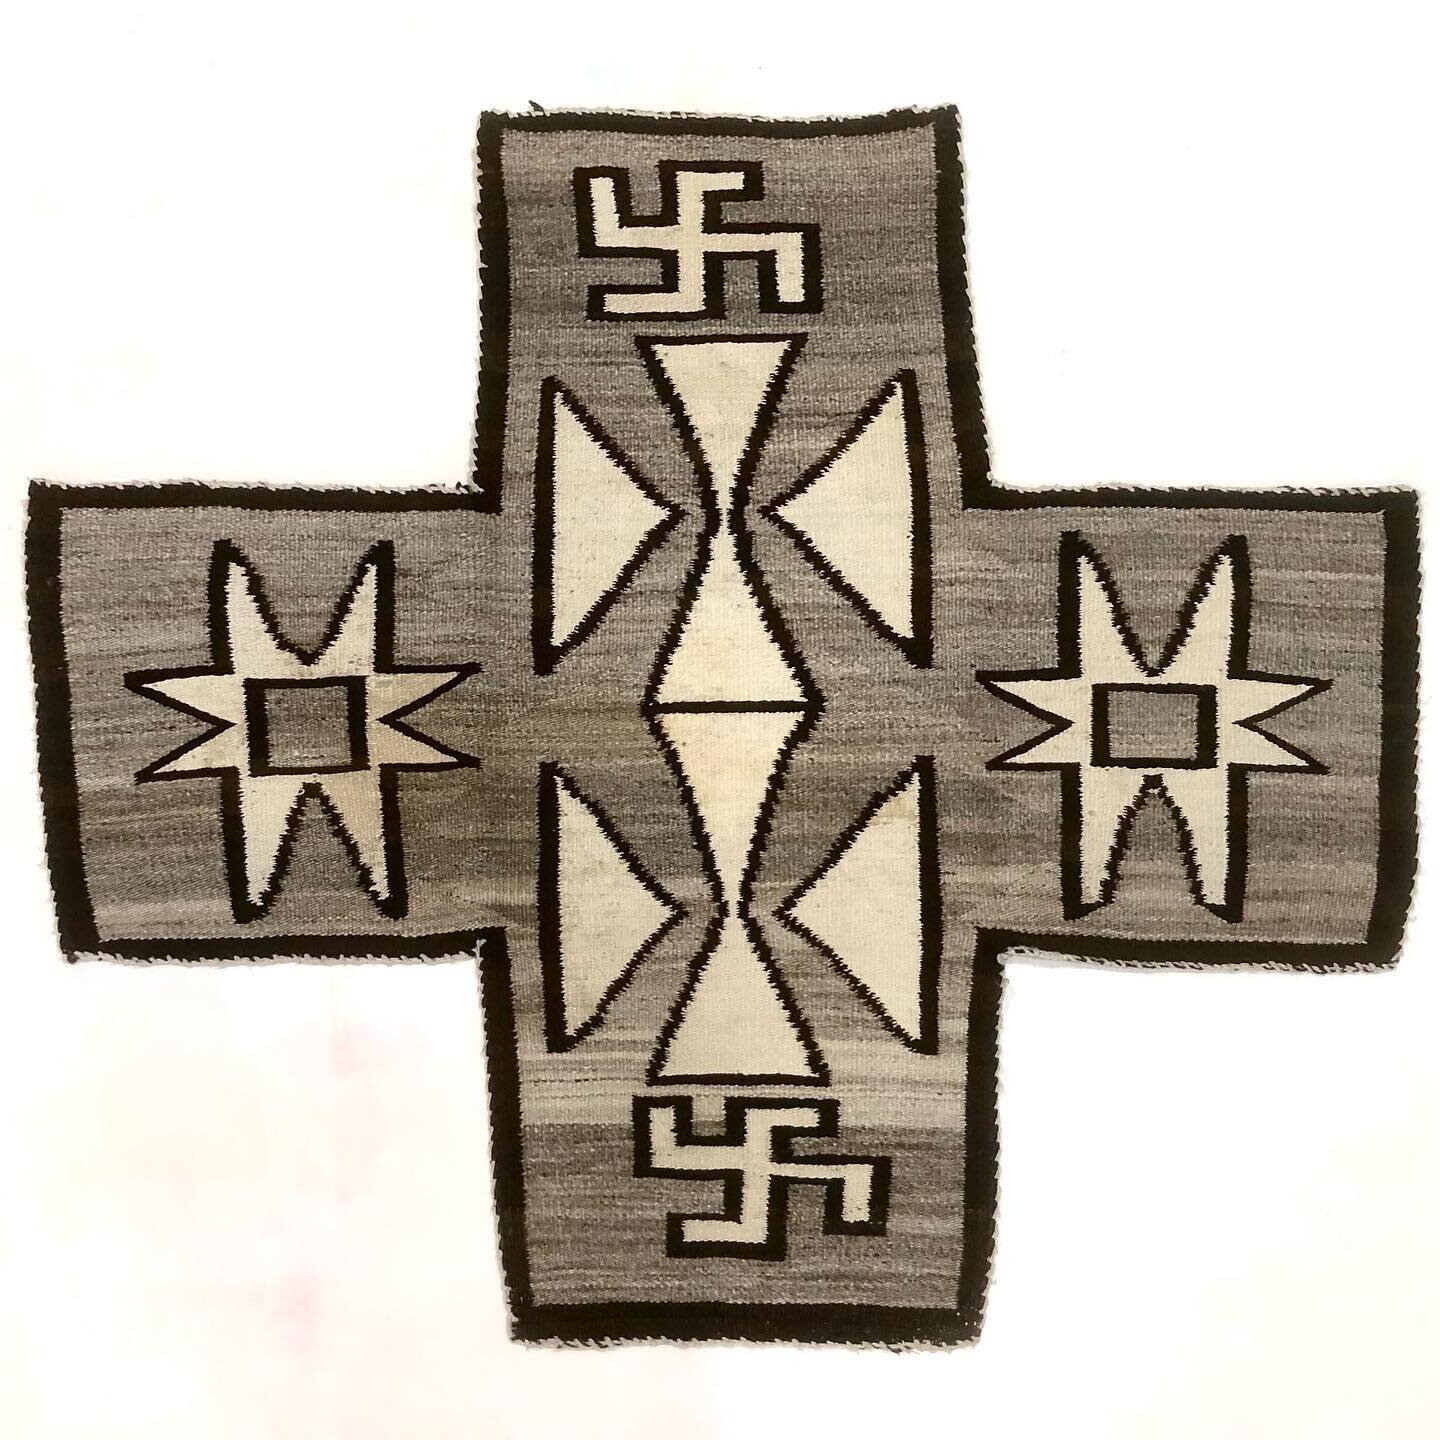 Four directions. 1920s Navajo Cross weaving. #whirrlinglogs #morningstar #gothiccross #fourdirections